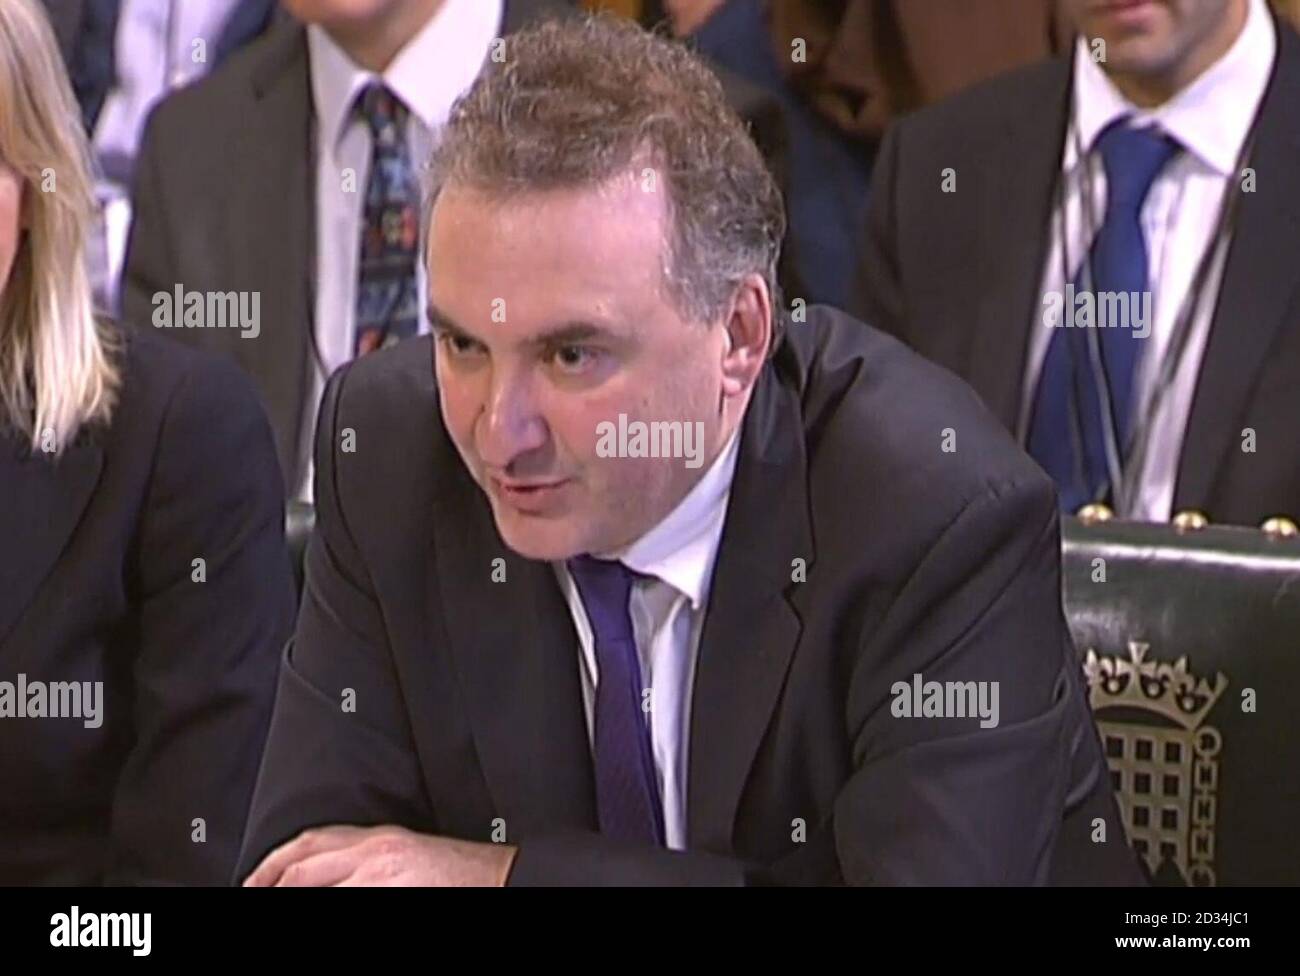 Chris Wormald, Permanent Secretary at the Department of Health, appears before the Public Accounts Committee at the House of Commons, London, after the influential parliamentary committee said public 'bickering' between Theresa May and the NHS over funding at a time when the health service is facing severe financial problems is an 'insult to taxpayers'. Stock Photo